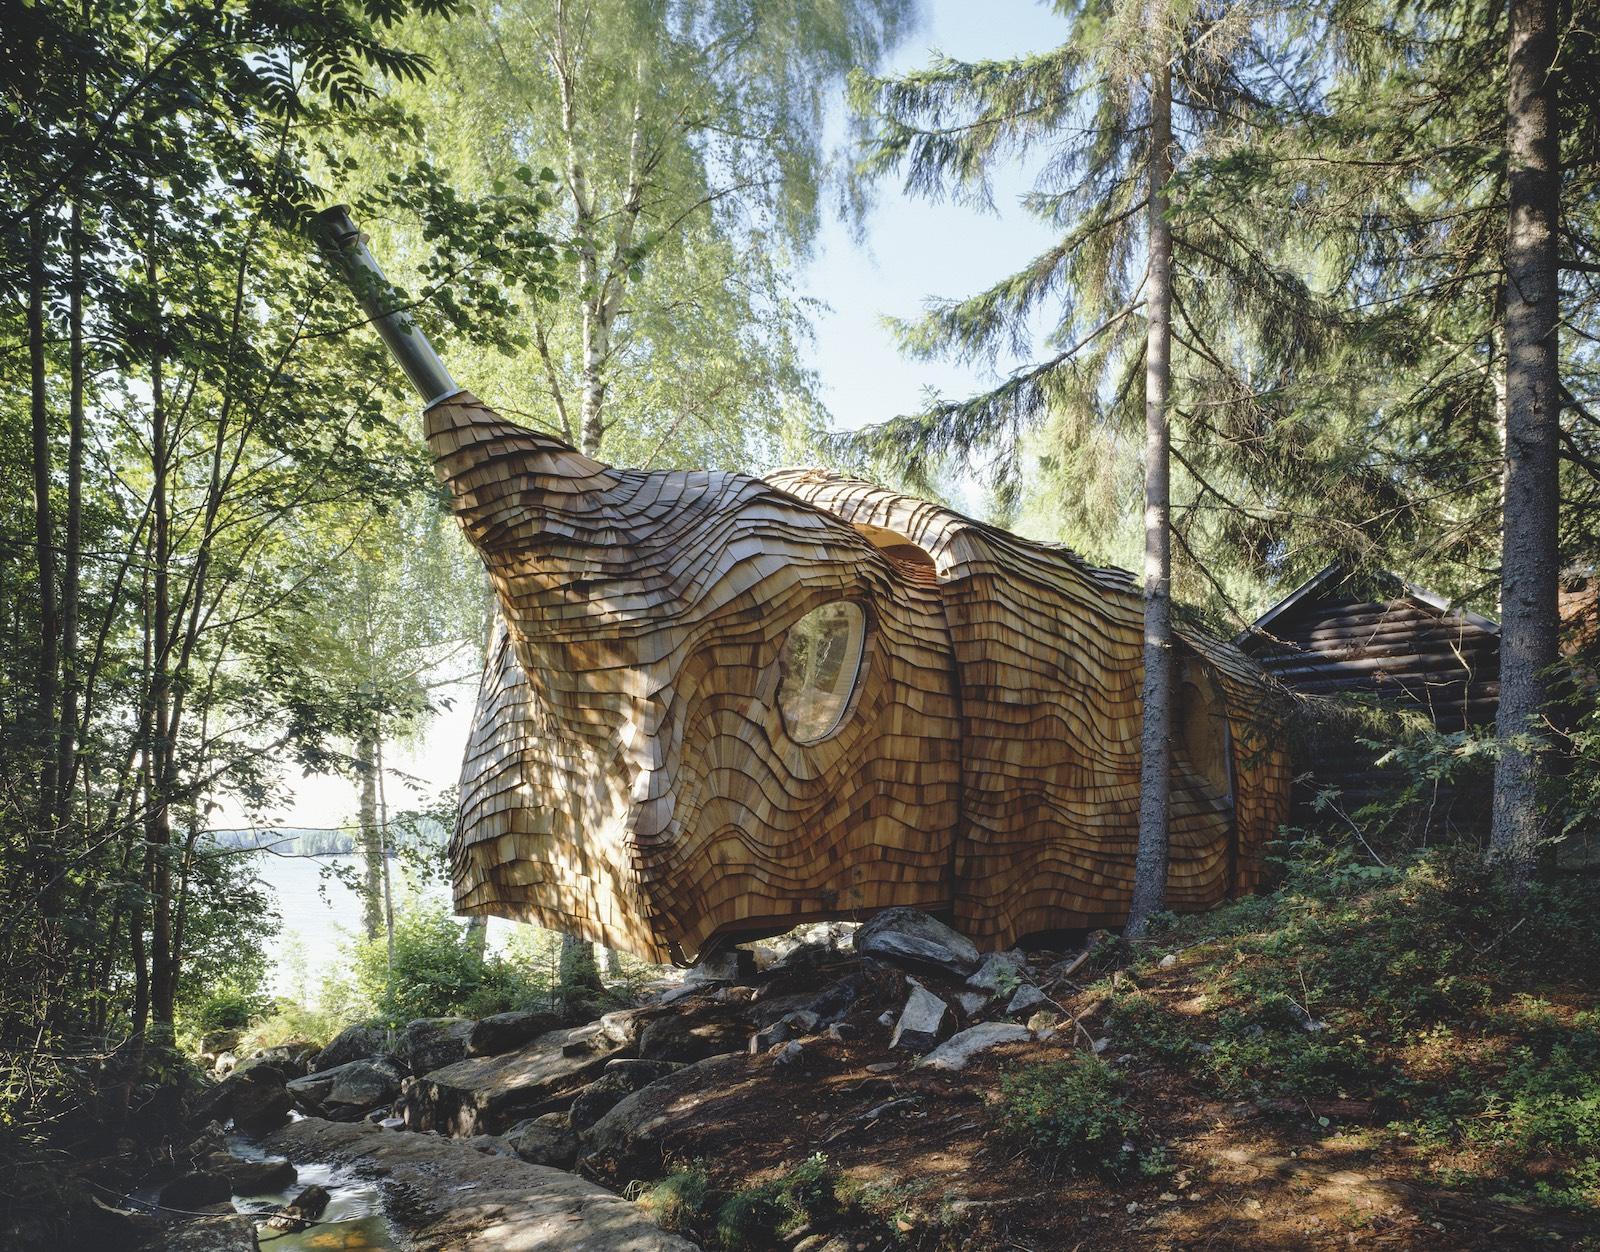 Dragspel House, 2004, Smolmark, Sweden, Natrufied Architecture. Picture credit: © Christian Richters 